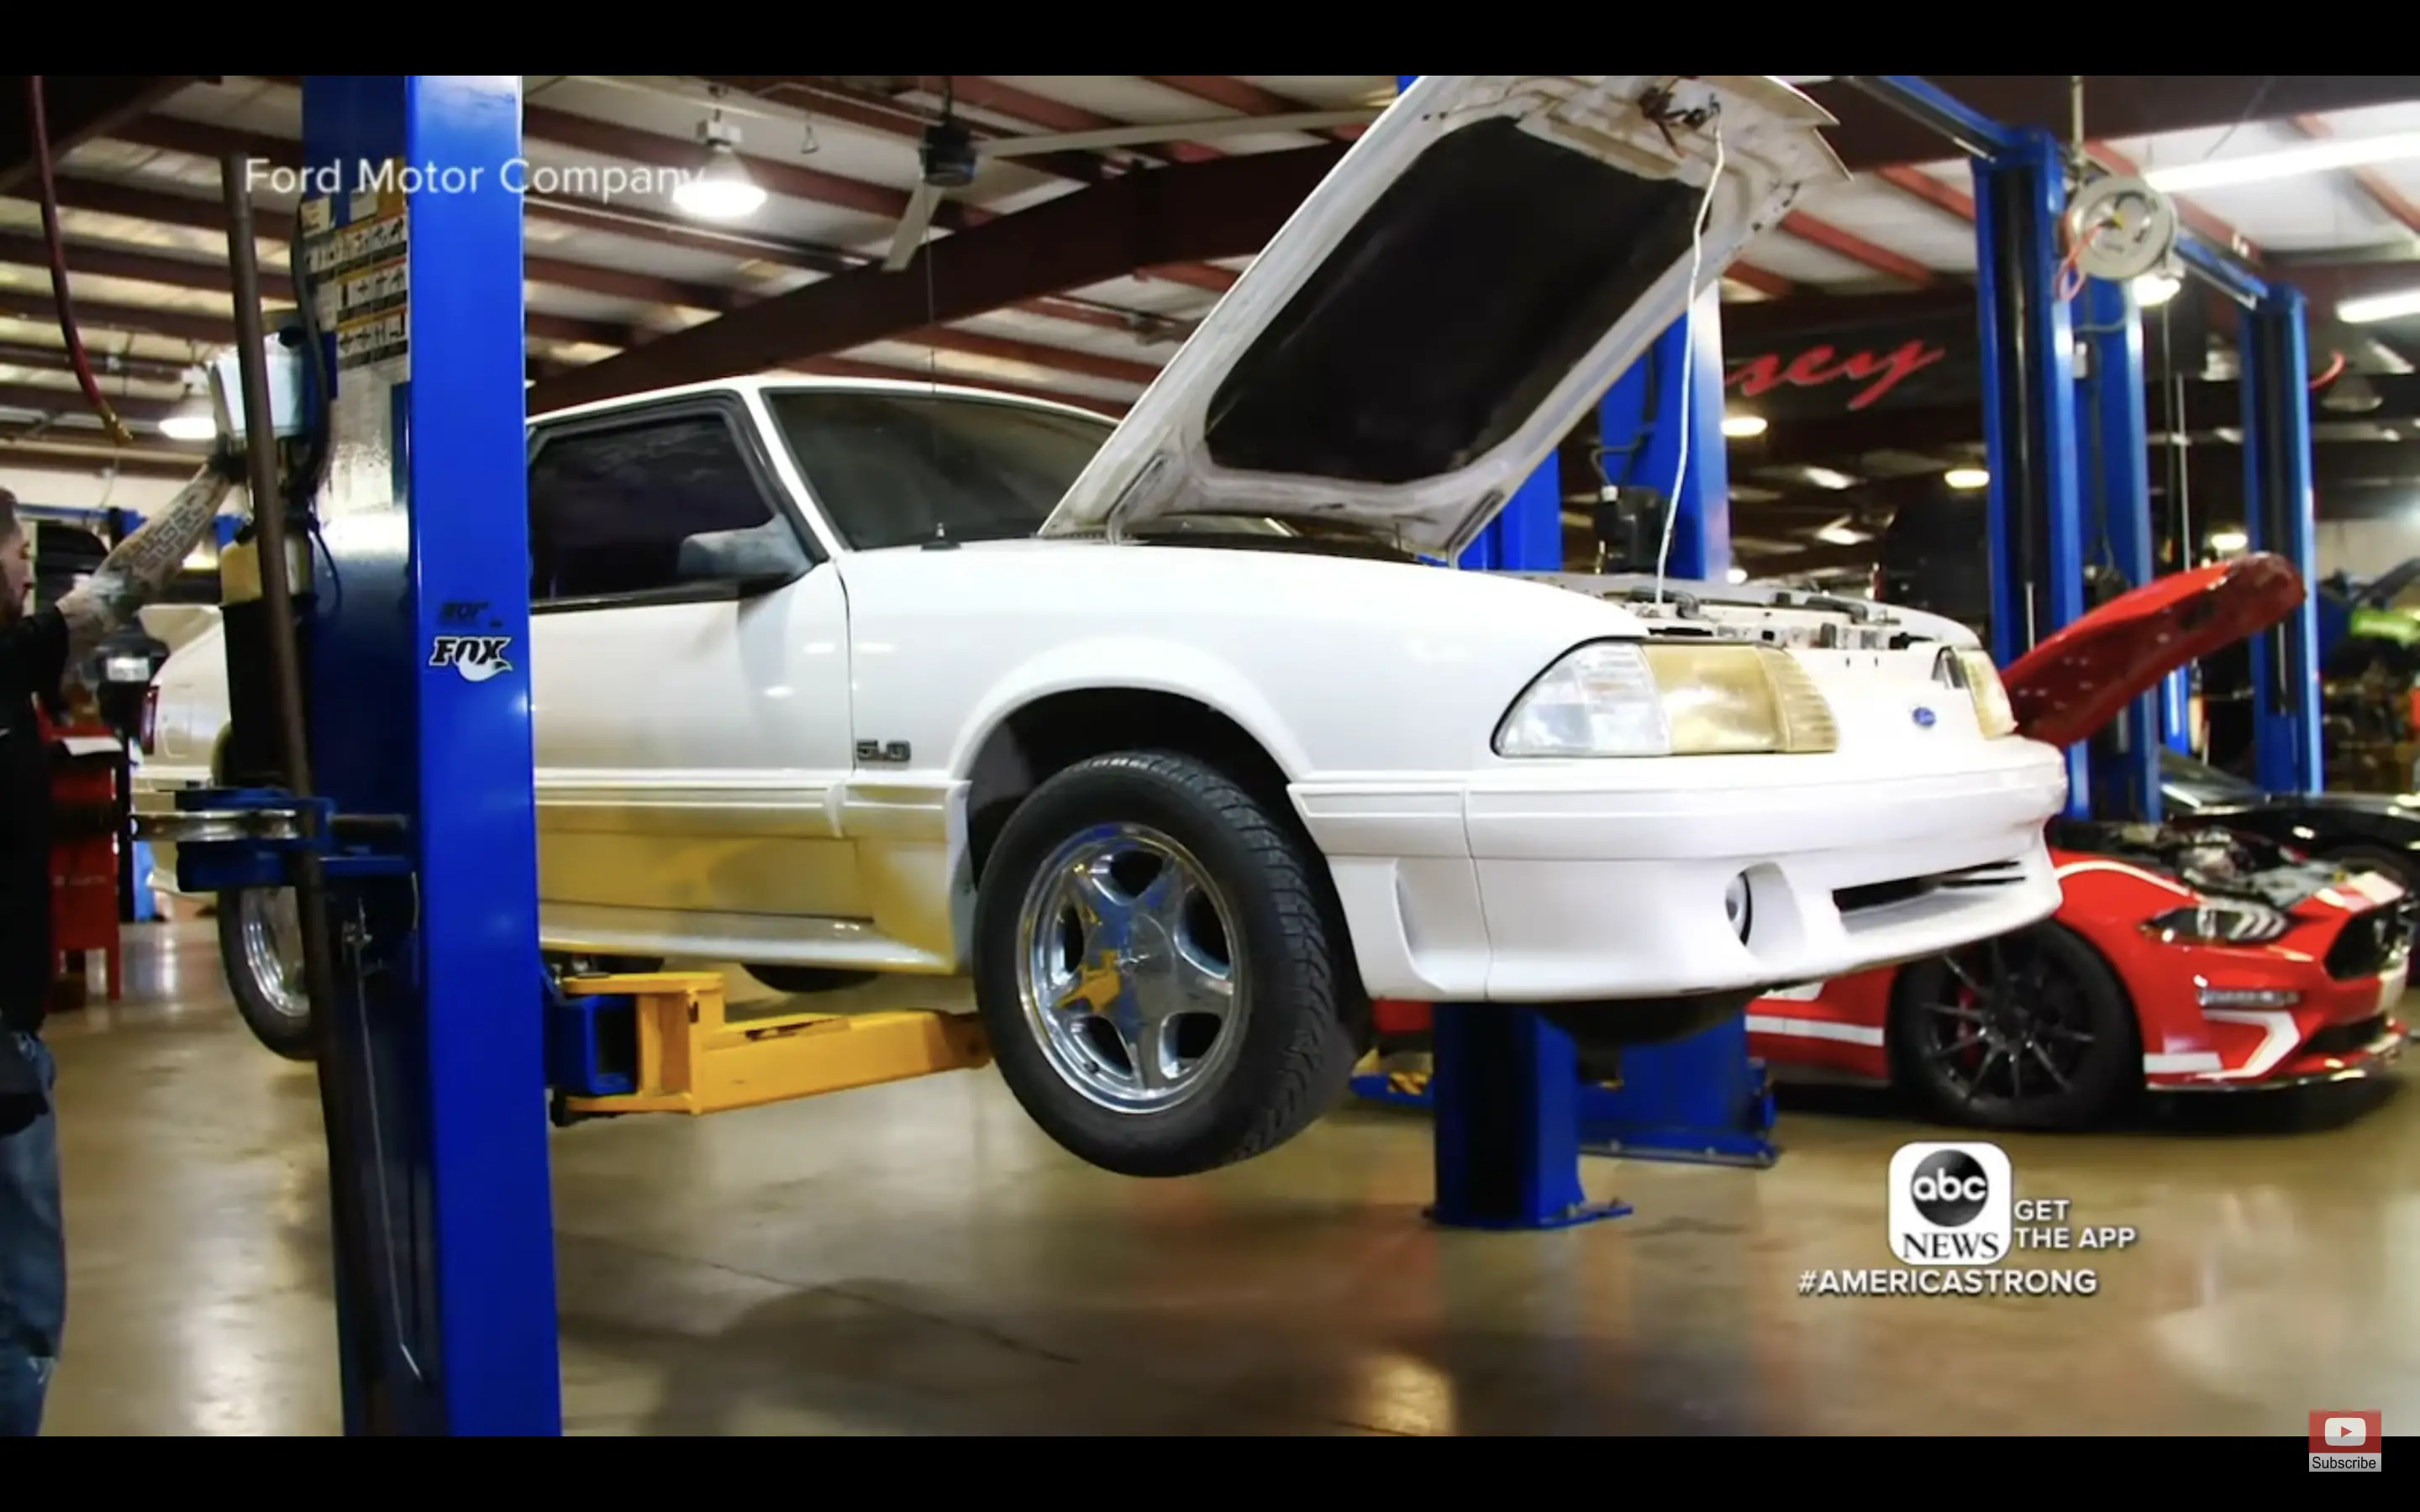 Wesley Ryas Ford Mustang GT von 1993 | Quelle: Youtube.com/ABC News